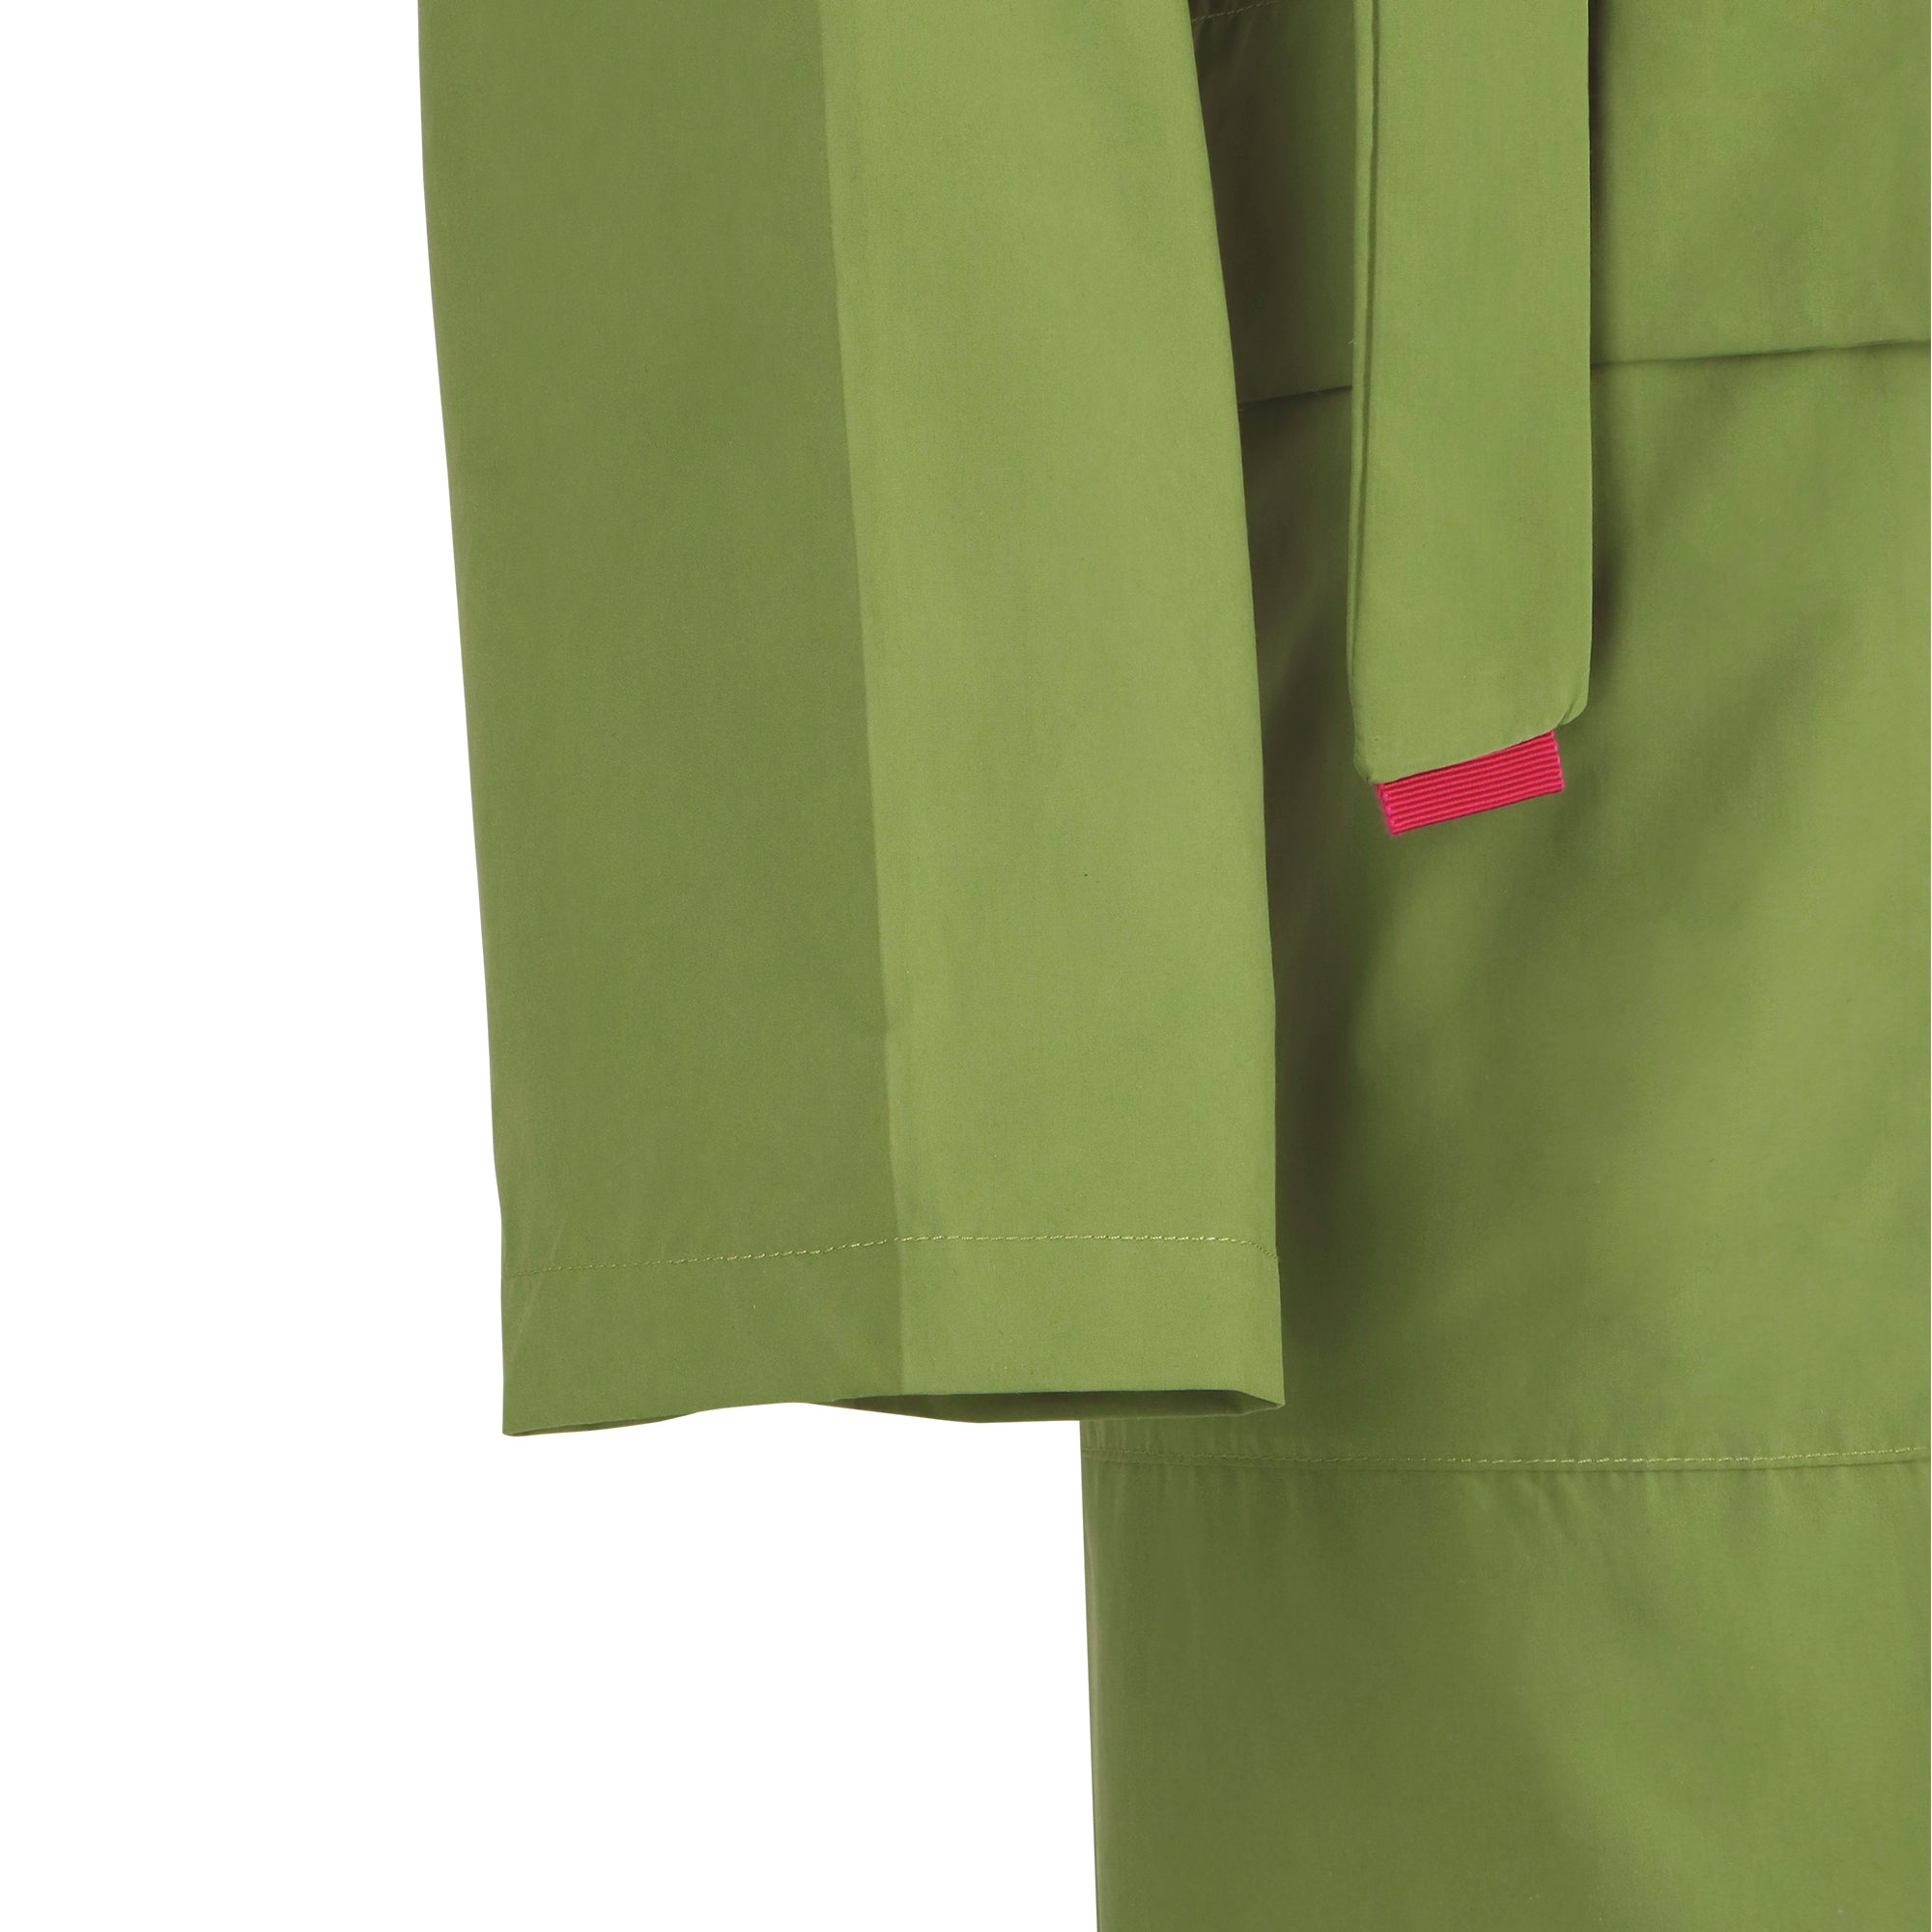 The classic raincoat - green color - sleeve detail